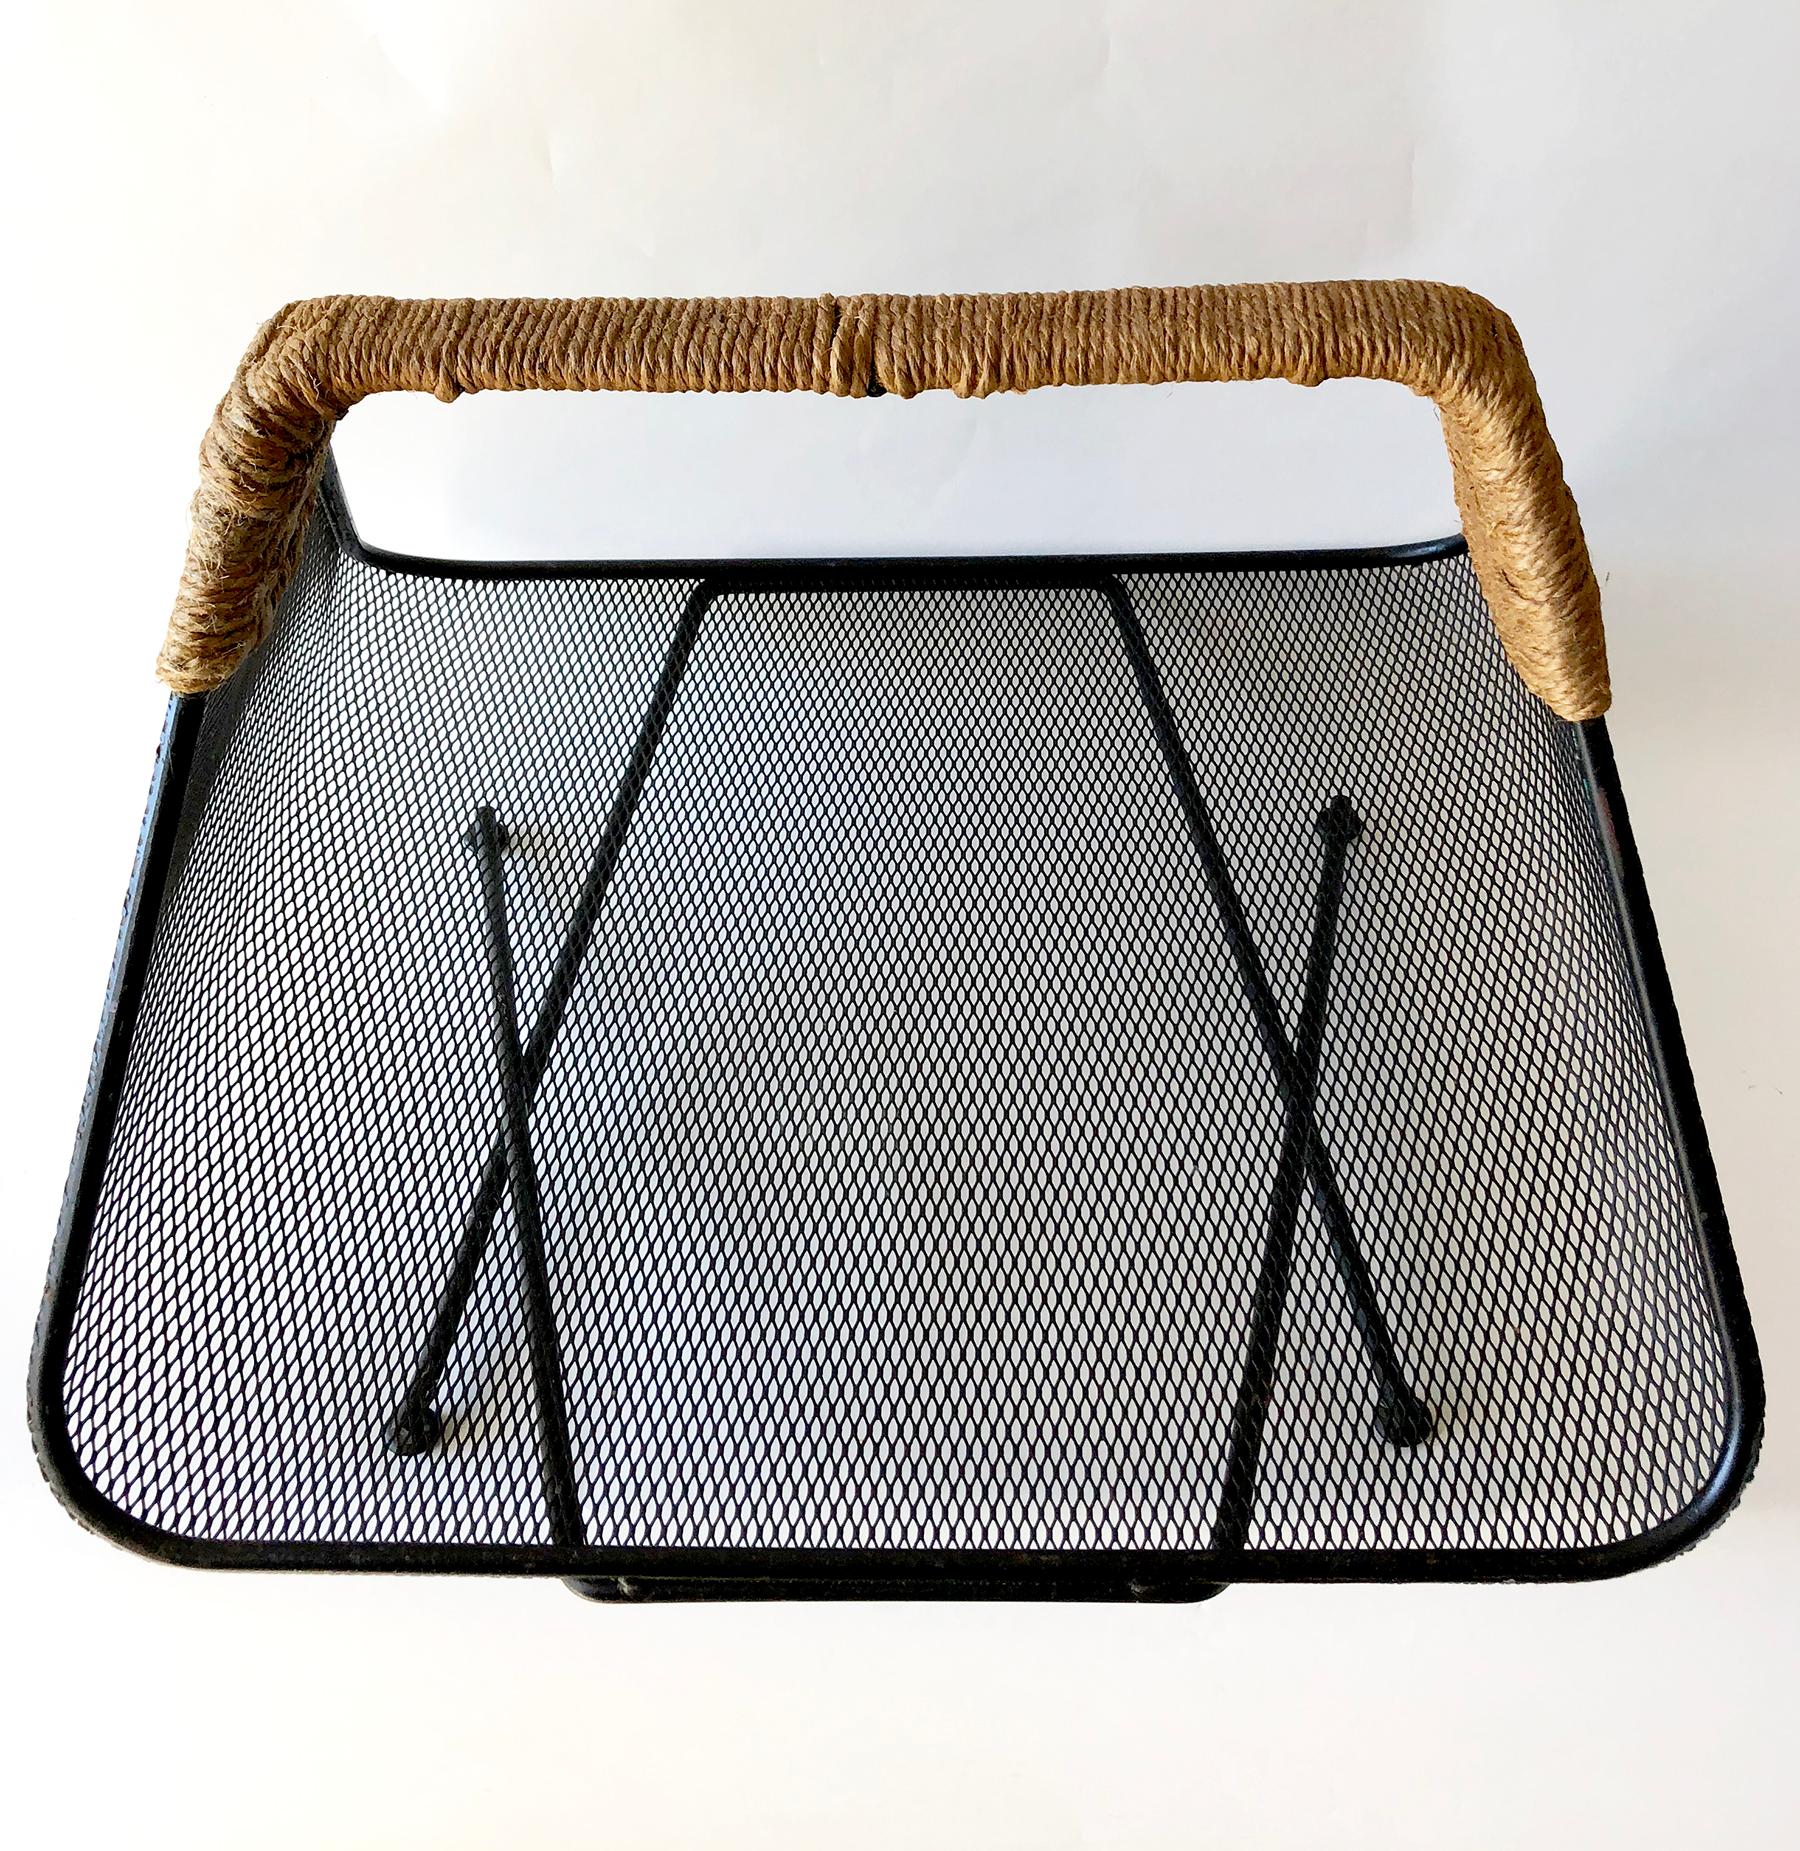 Iron mesh with rush wrapped handle by Tony Paul for Woodlin-Hall magazine rack or log holder, circa 1950's. Measures 15